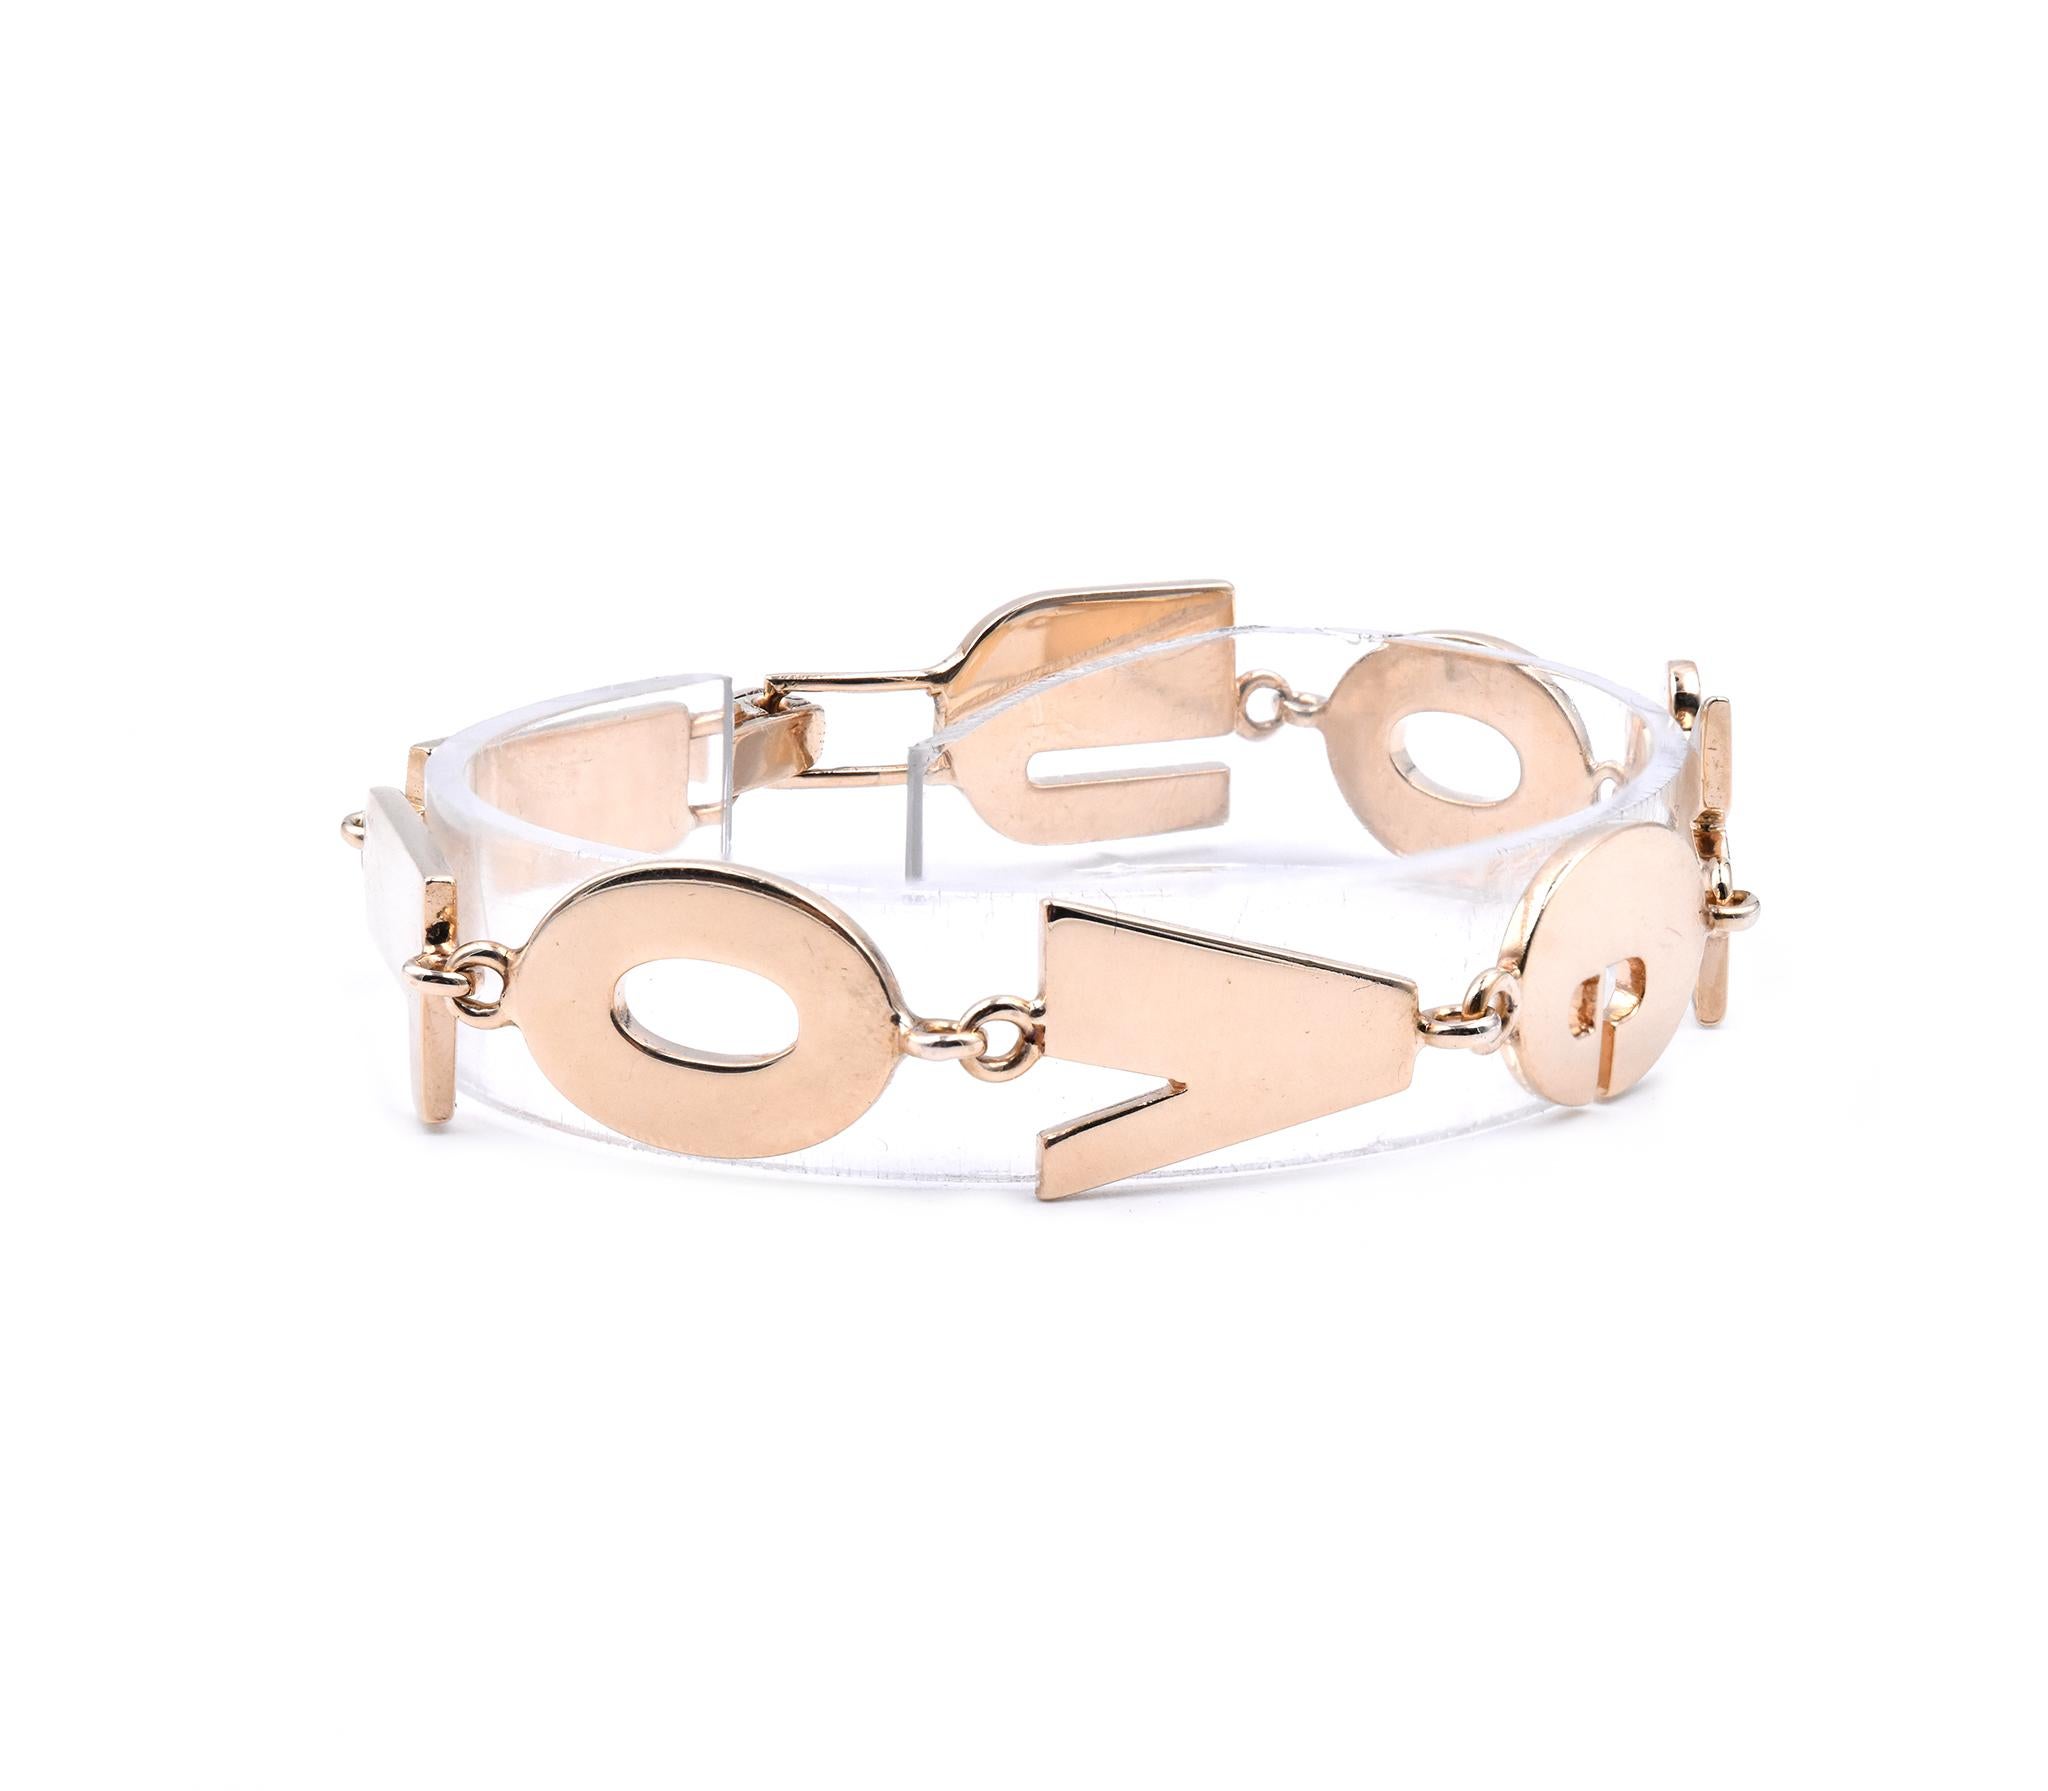 Designer: custom 
Material: 14k yellow gold
Dimensions: the bracelet will fit up to a 7.5-inch wrist, links measure 16mm wide
Weight: 30.57 grams
